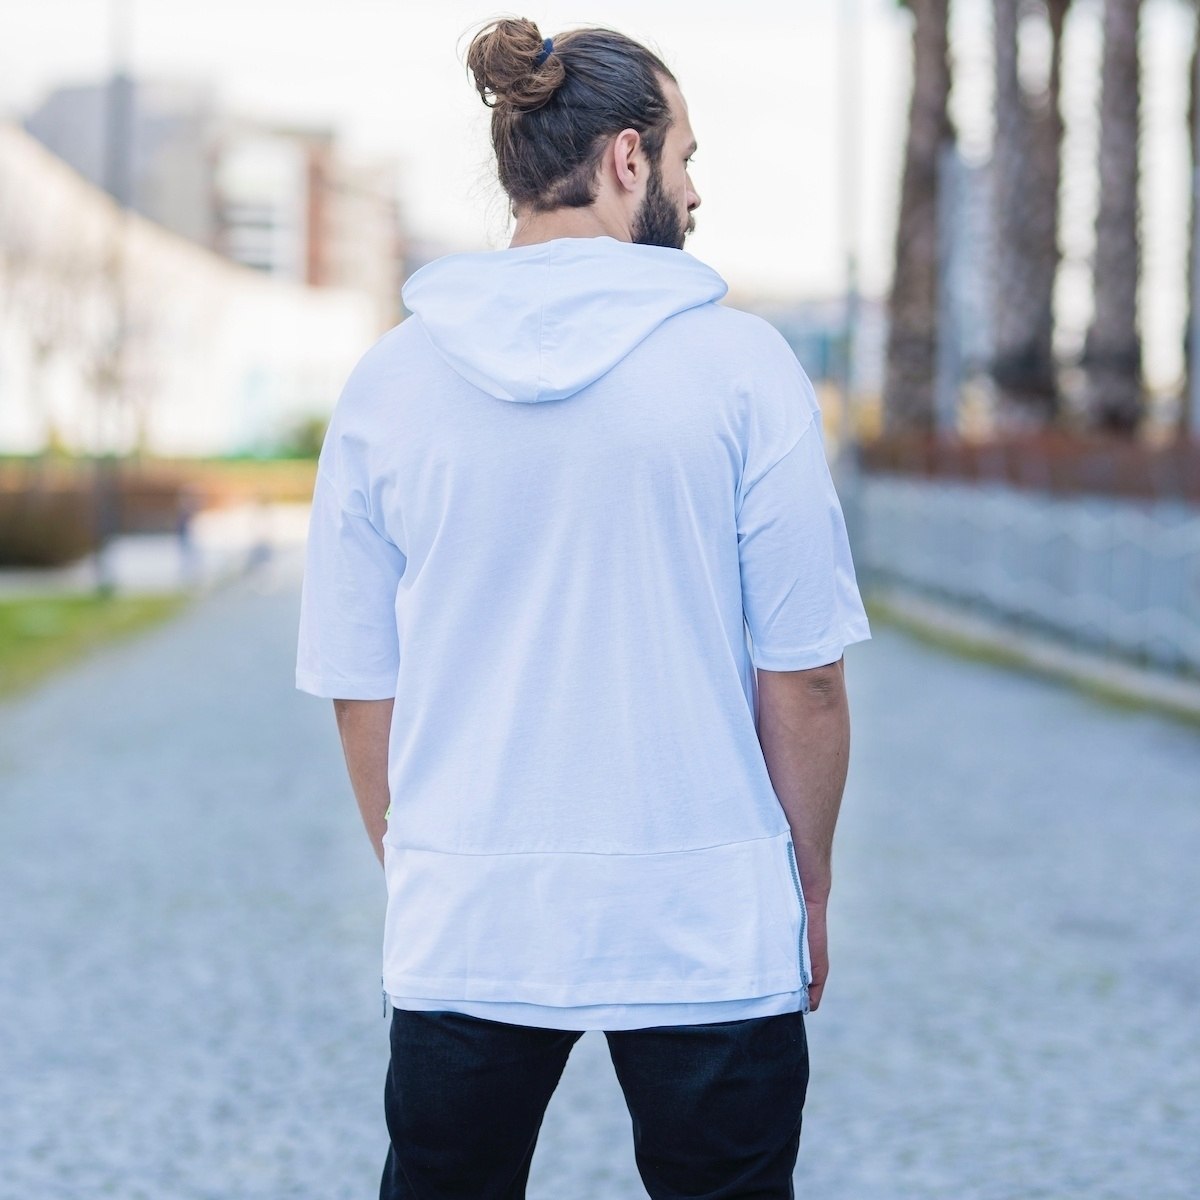 Men's Double-Tailed Hoodie In Neon-White - 4